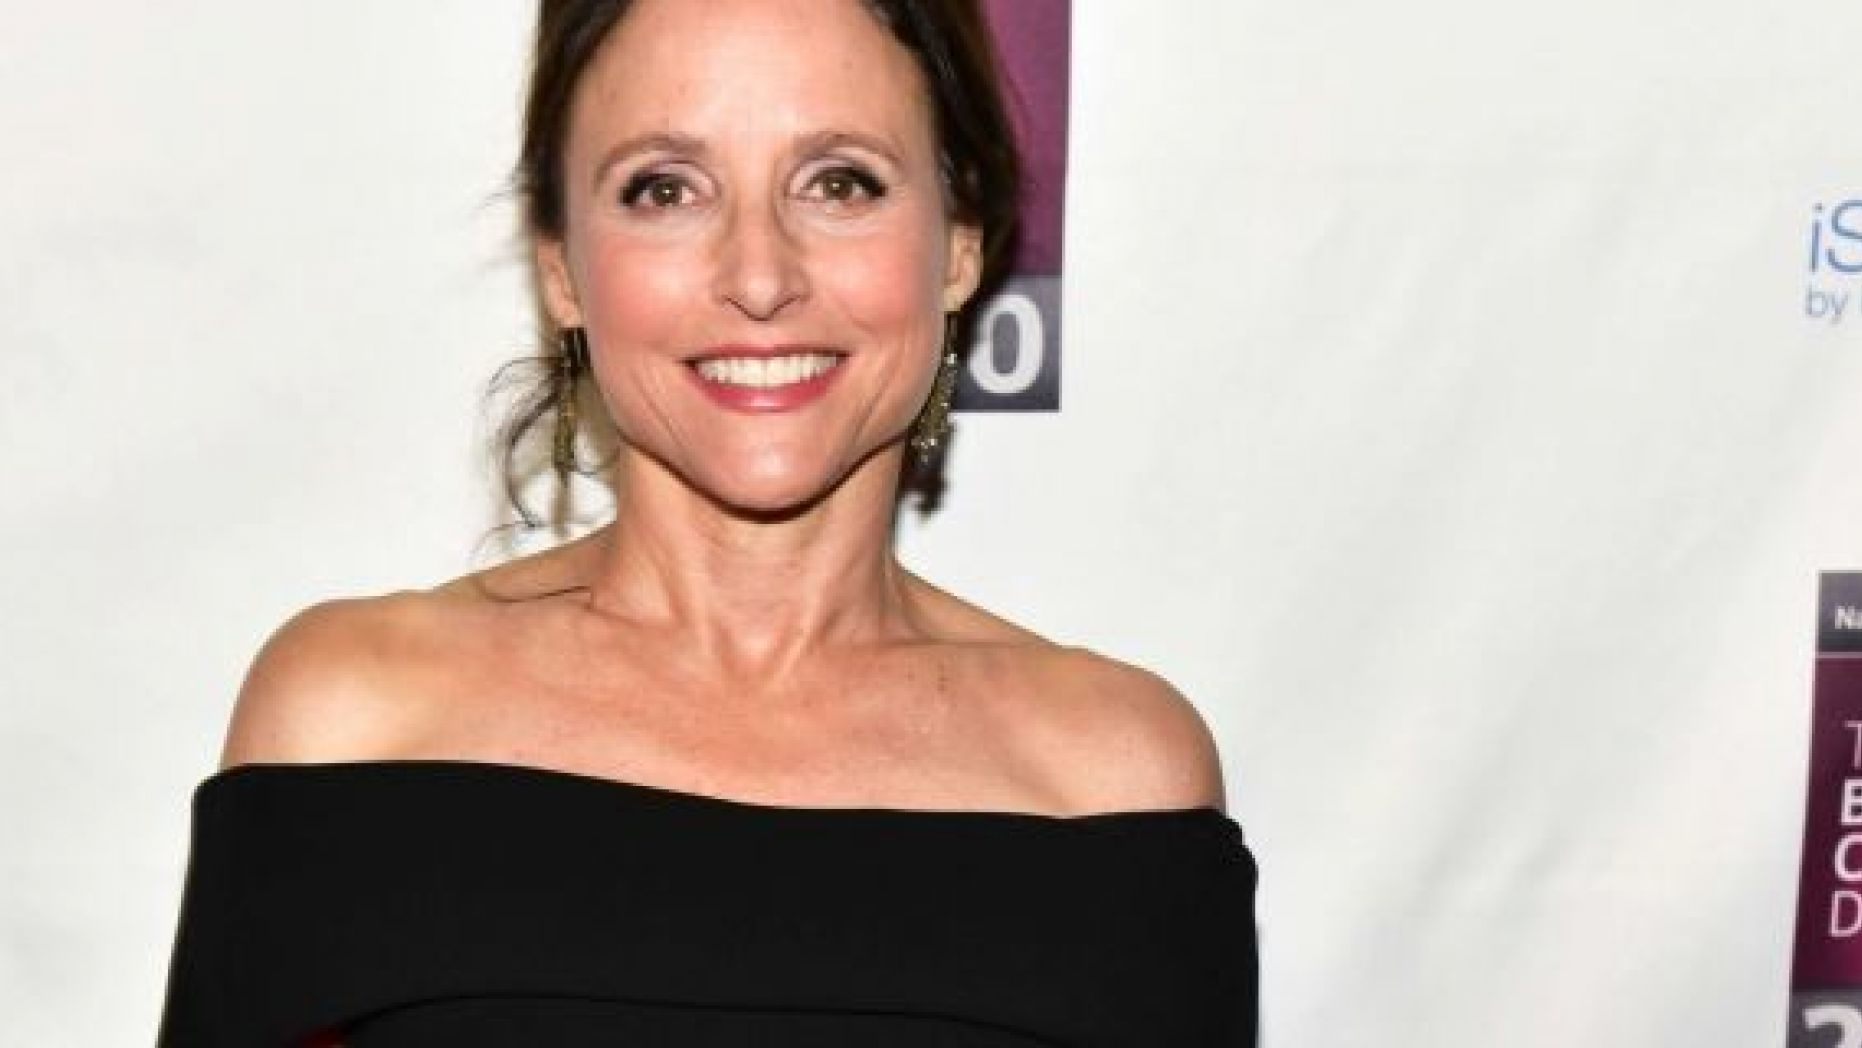 Julia Louis-Dreyfus called President Trump a "pretend president" and said she wasn't "a fan" during the HBO portion of the Television Critics Association Winter Press Tour in Los Angeles on Friday.